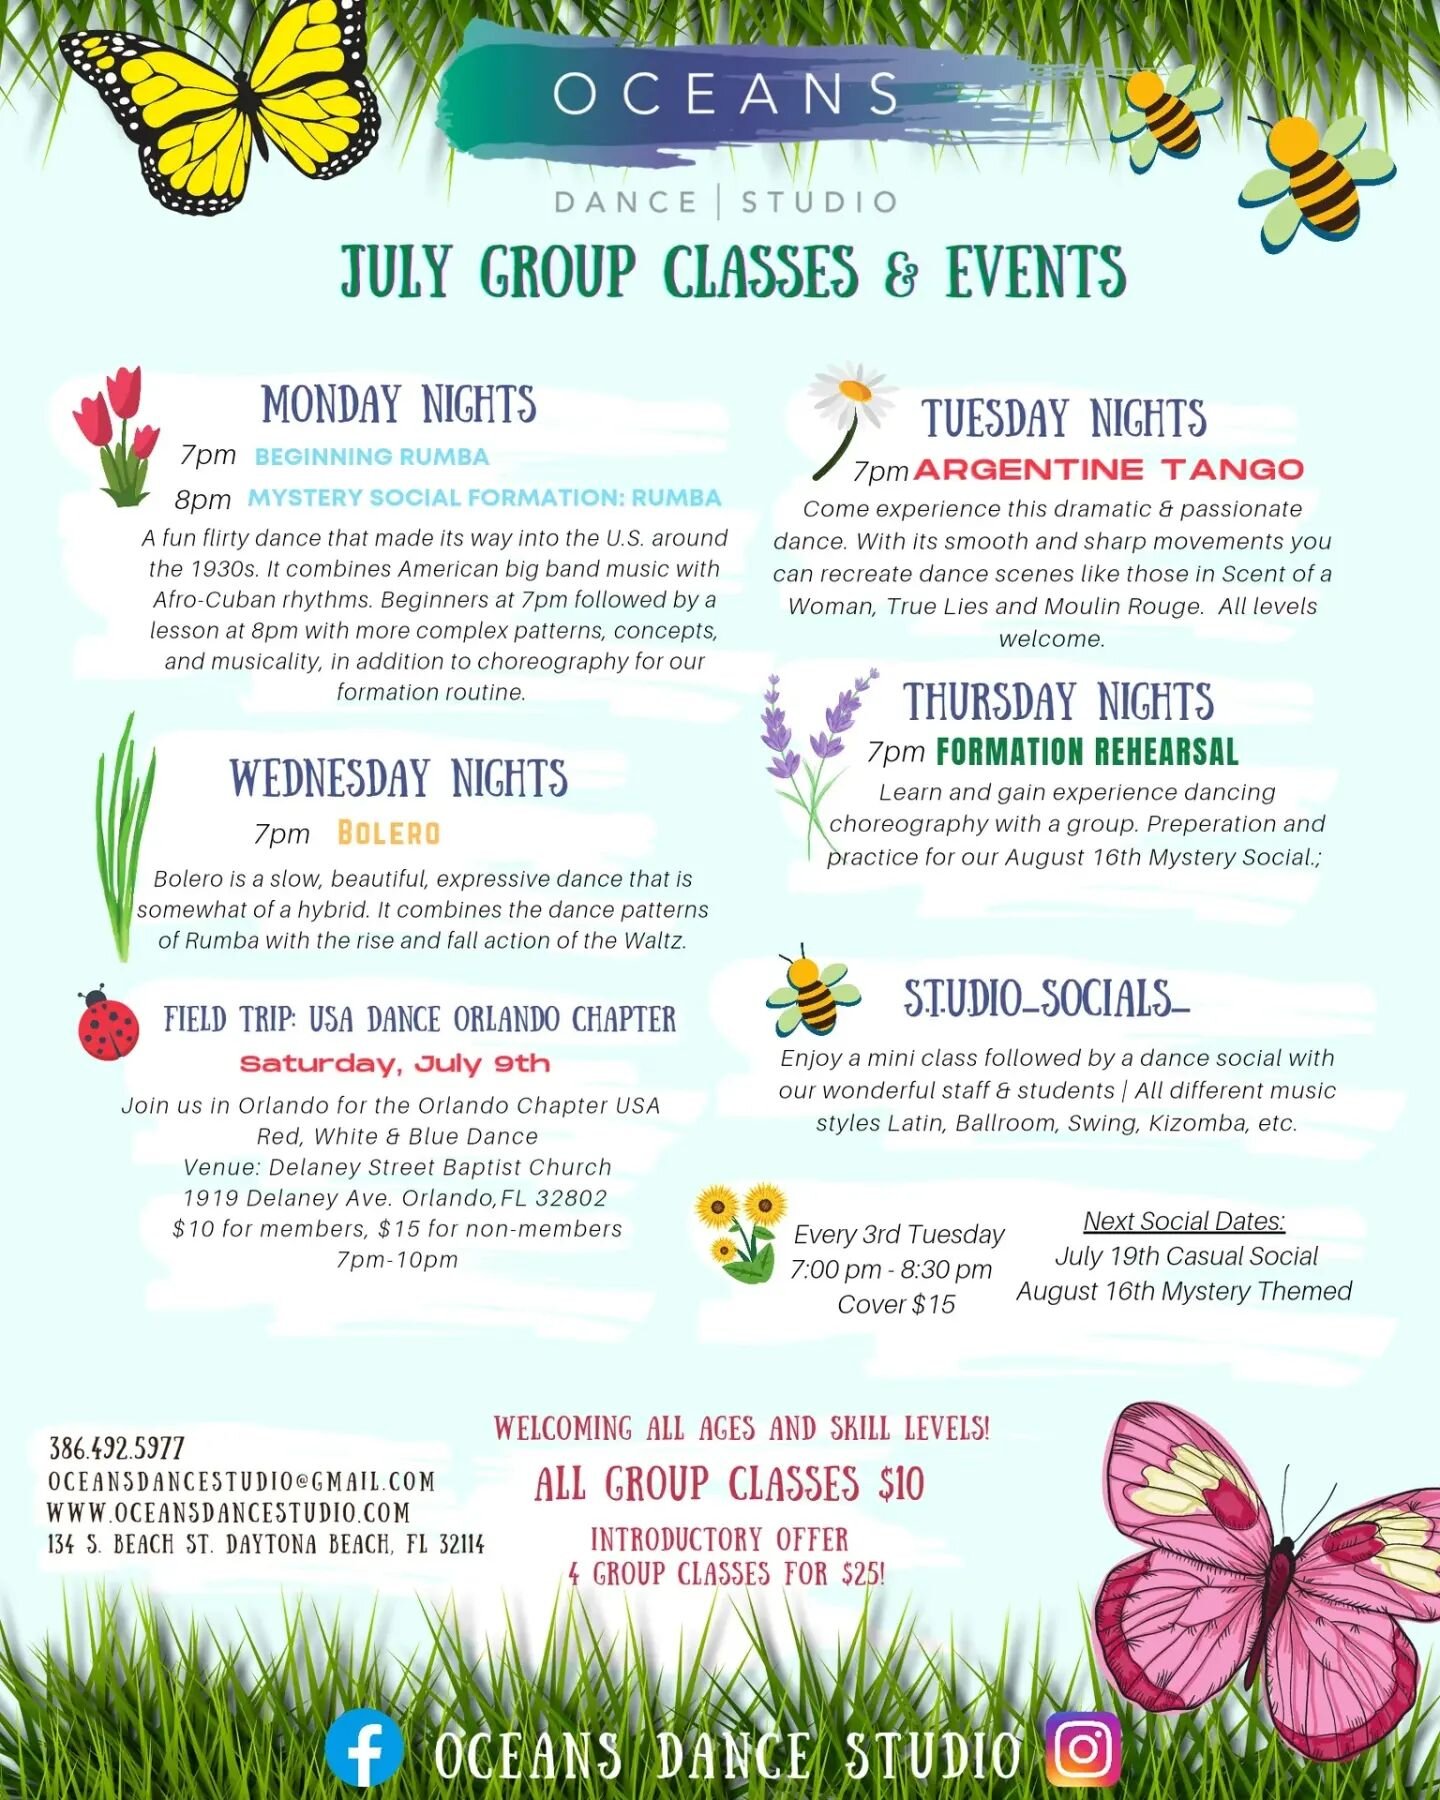 Life is better when you're dancing you way through it. Check out our July group class calendar to see all the dancing fun you could be having with us!

Group Classes:
🌟 $10 per person, per class
🌟 New to our Studio?🌟
$25 gets you 4 classes
🌟Get B